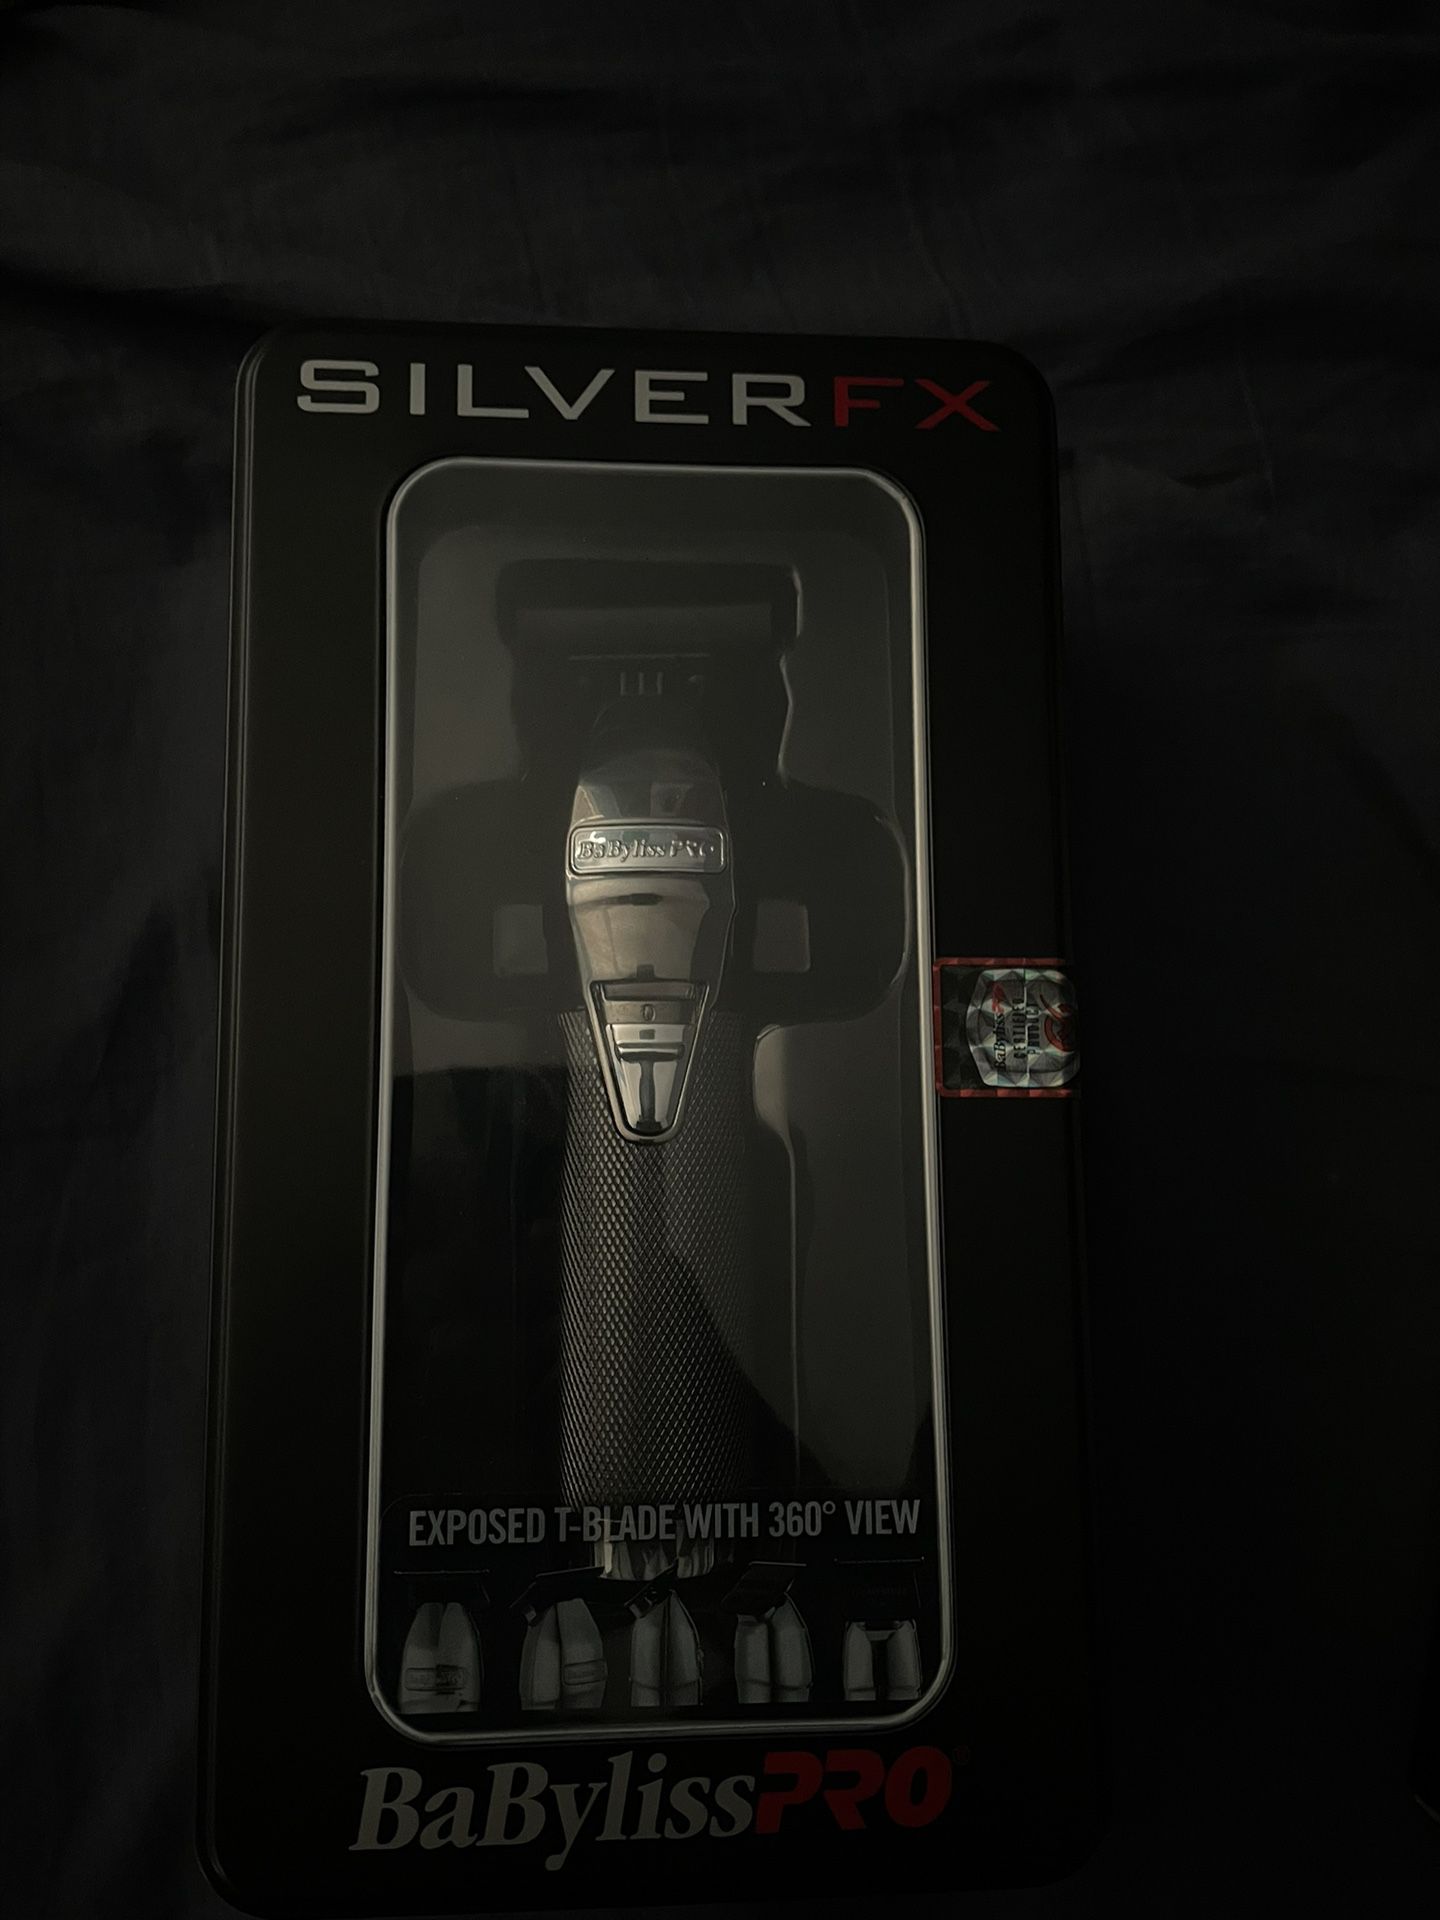 Babyliss Silver fx Trimmer